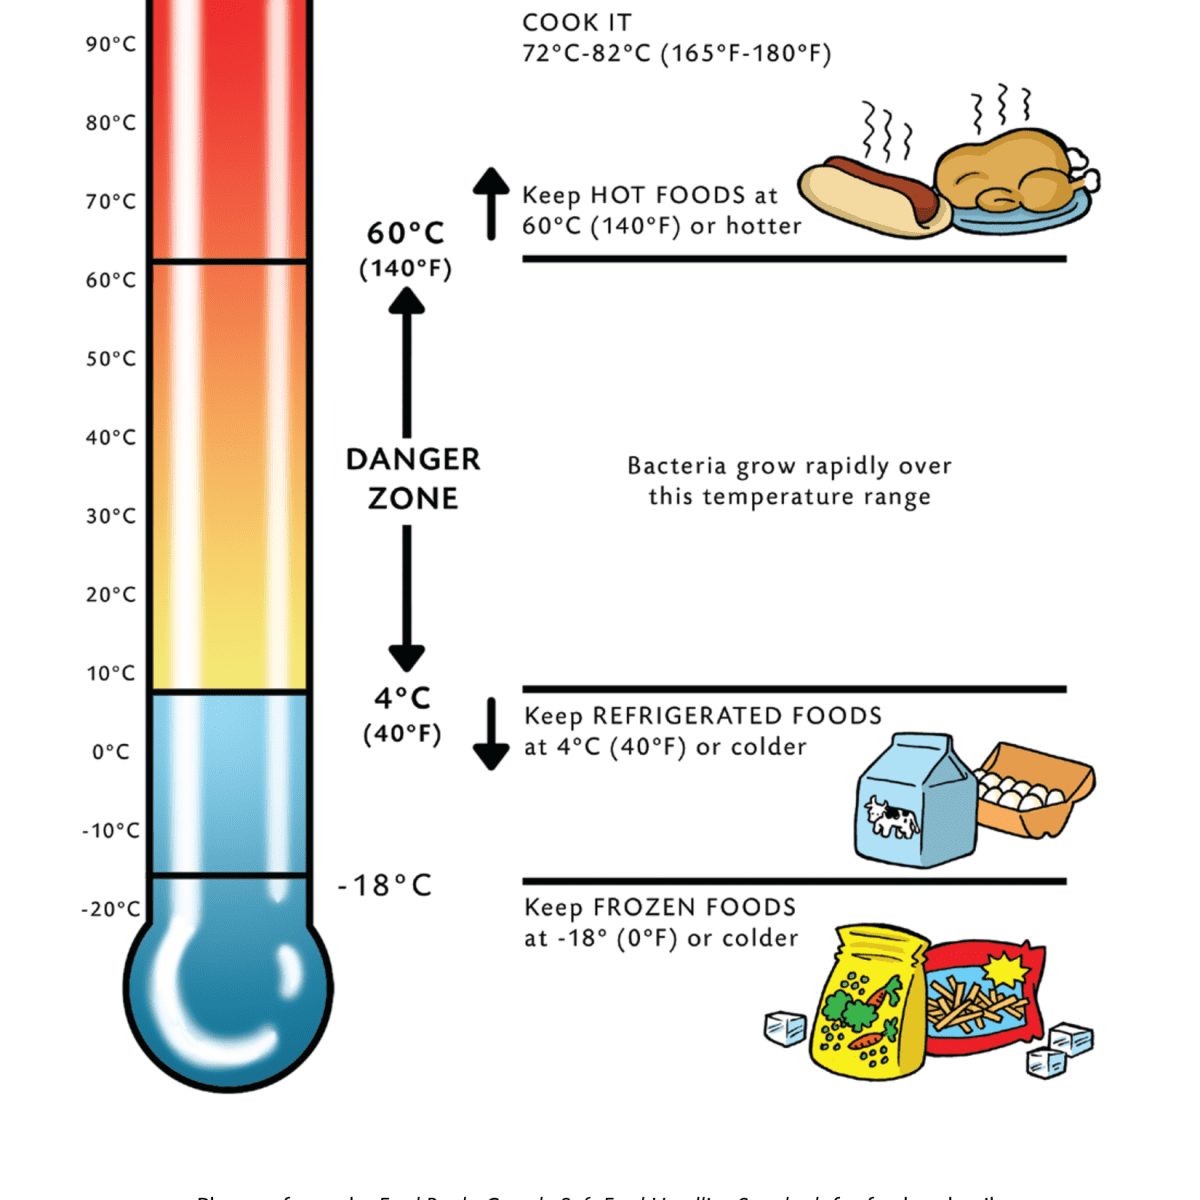 Food Safety 101: Proper Cooking Temperatures